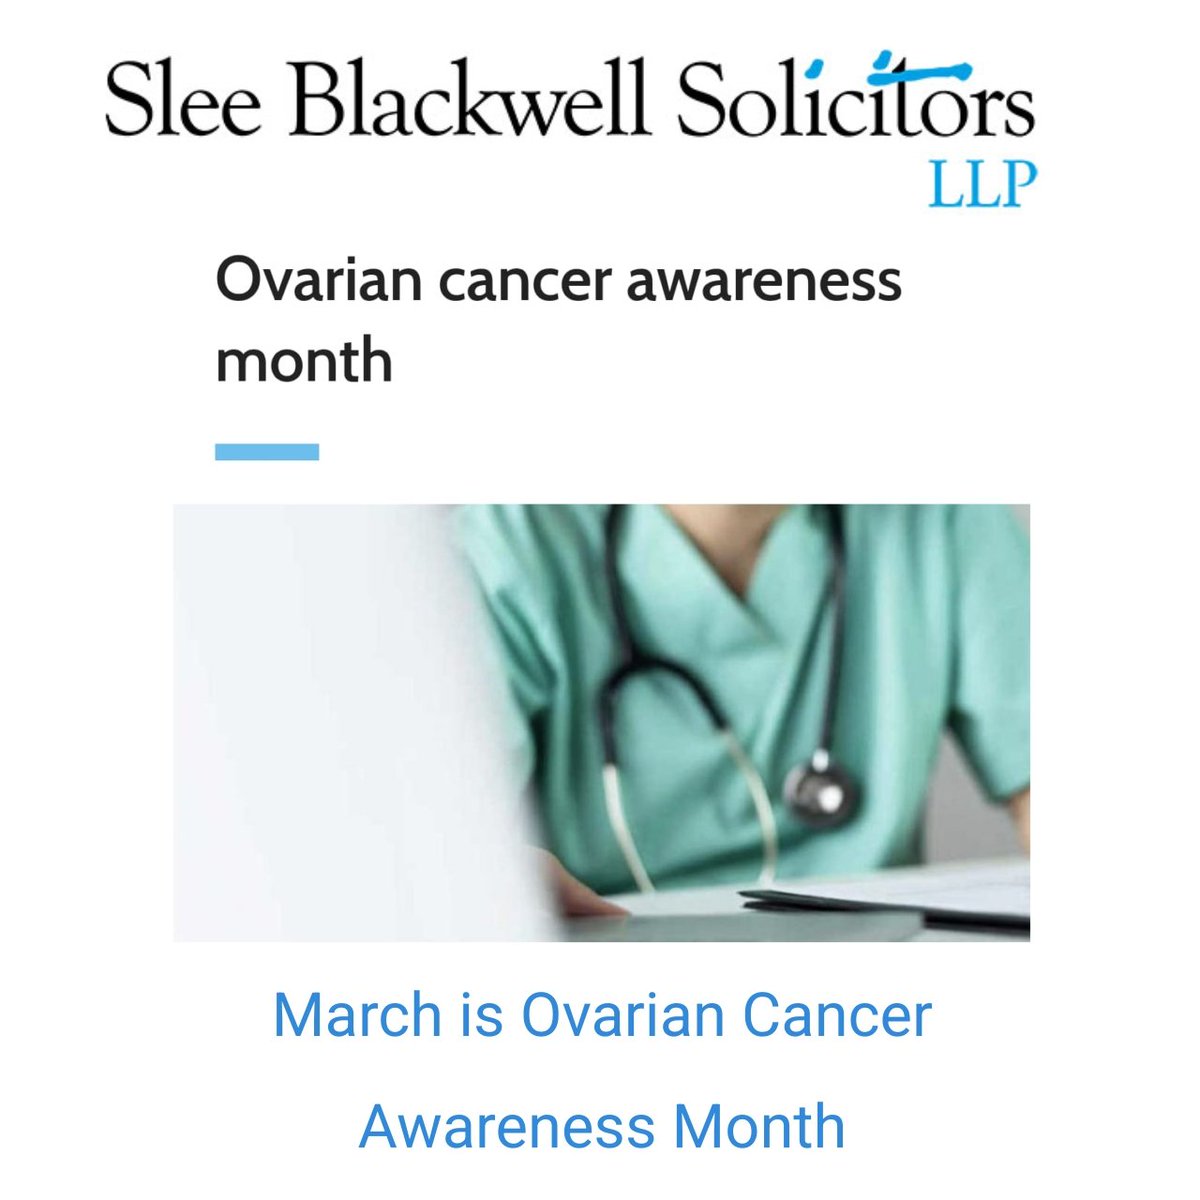 March is Ovarian Cancer Awareness Month. Read more here about the symptoms of this disease, one of the leading causes of death for women in the UK. sleeblackwell.co.uk/legal-articles… #OvarianCancerAwareness